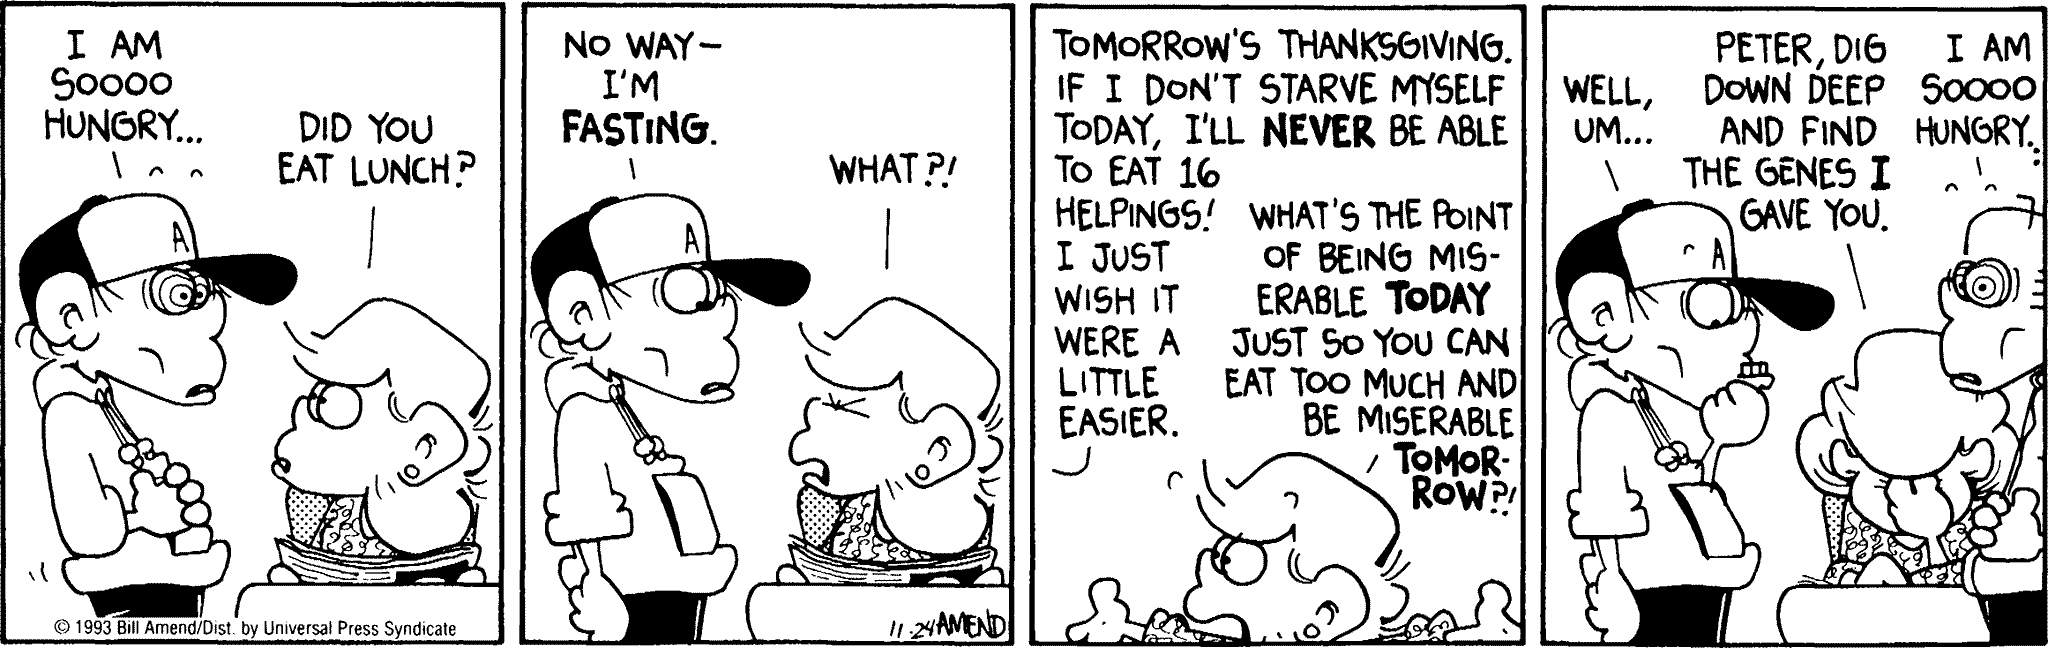 Thanksgiving Comics - FoxTrot comic strip by Bill Amend - Published November 24, 1993 - Transcript: Peter: I am soooo hungry.... Andy: Did you eat lunch? Peter: No way- I'm fasting. Andy: What?! Peter: Tomorrow's Thanksgiving if I don't starve myself today, I'll never be able to eat 16 helpings! I just wish it were a little easier. Andy: What's the point of being miserable today just so you can eat too much and be miserable tomorrow?! Peter: Well, um.... Andy: Peter, dig down deep and find the genes I gave you. Roger: I'm soooo hungry.